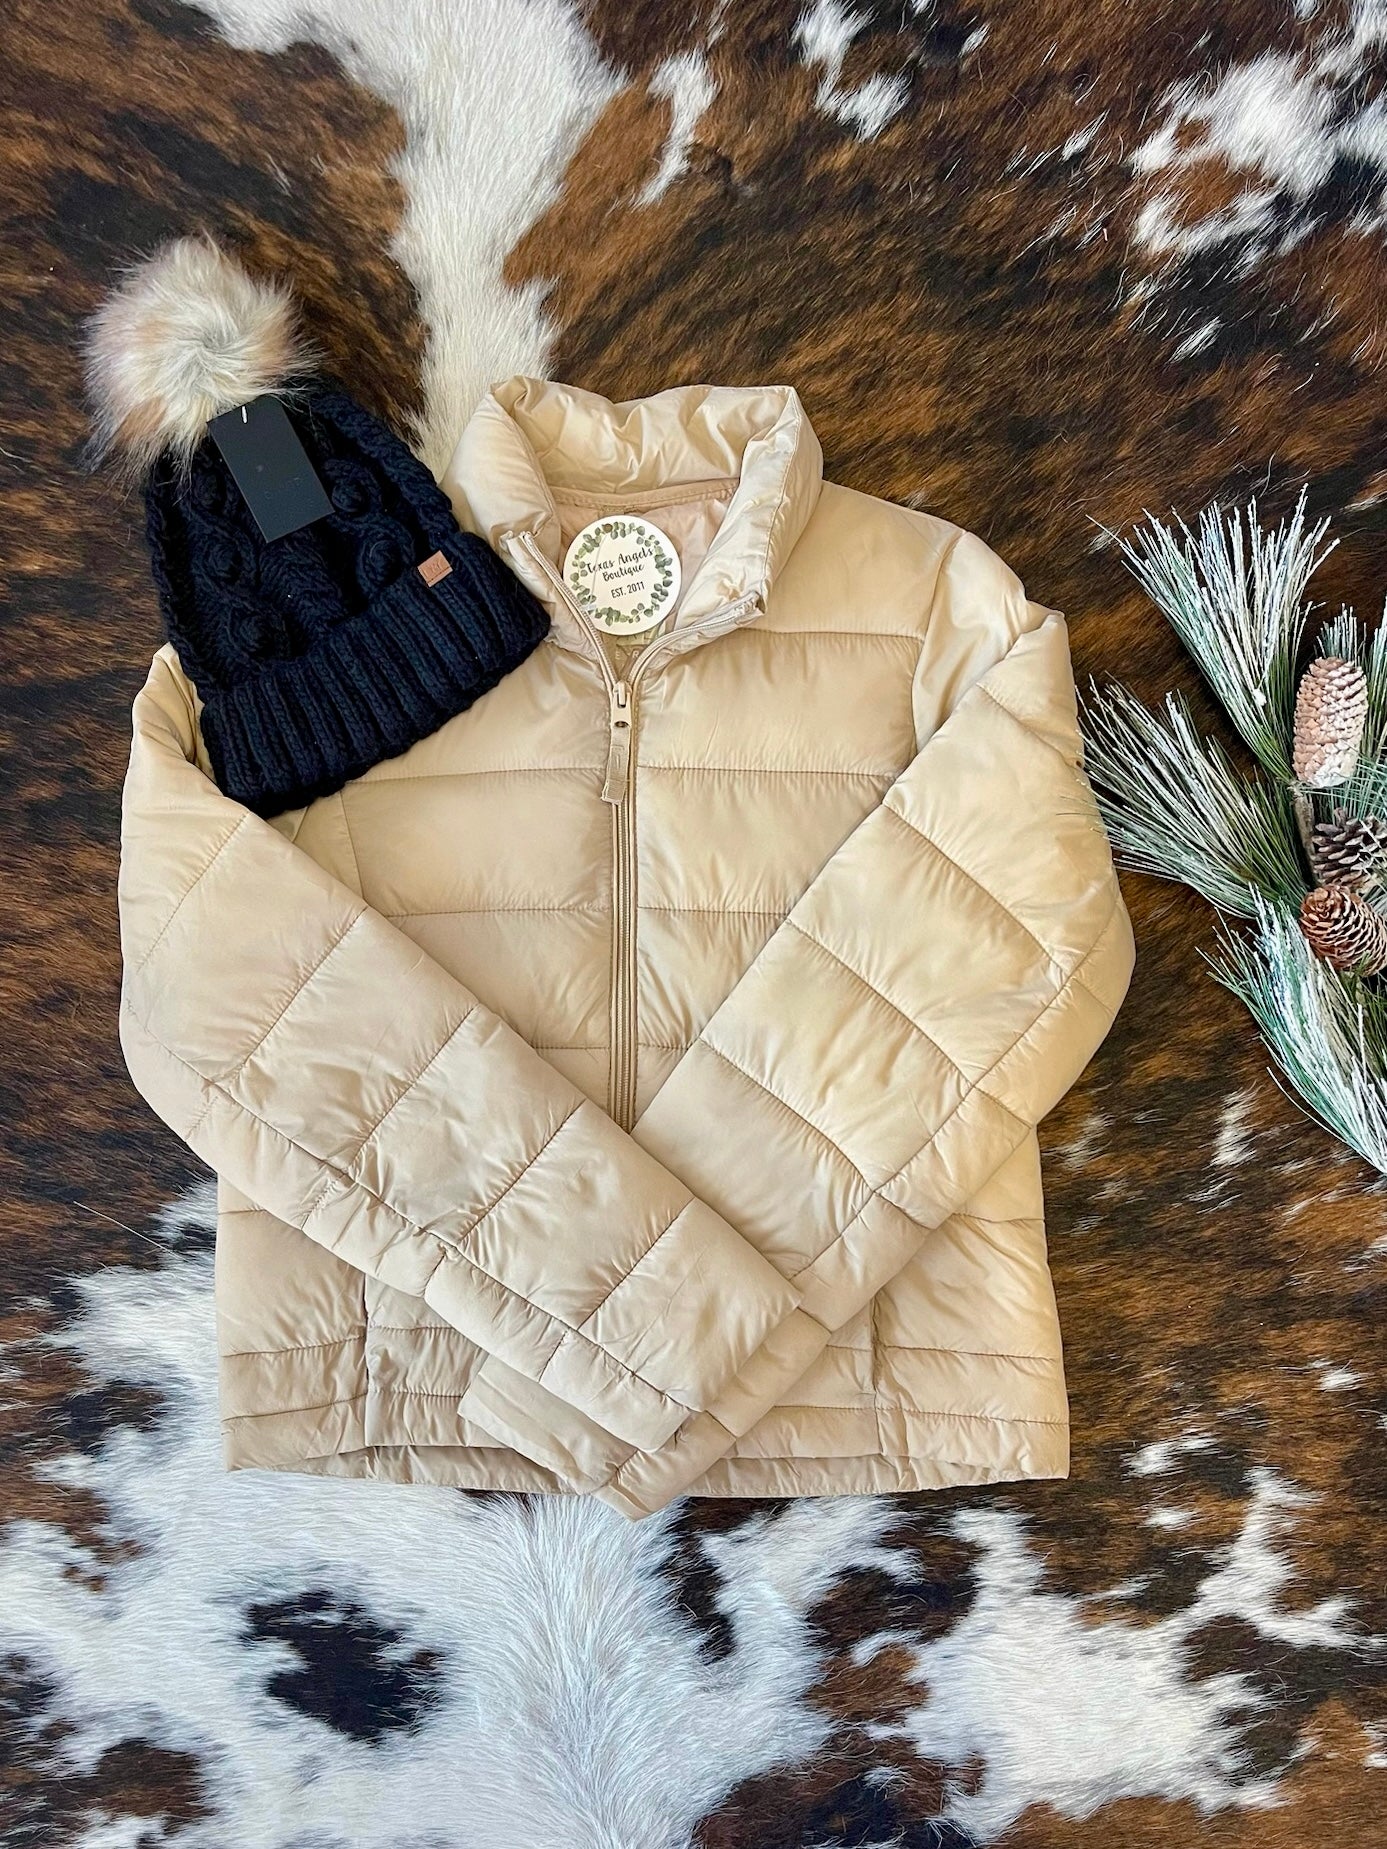 Perfect For You Khaki Puffer Jacket